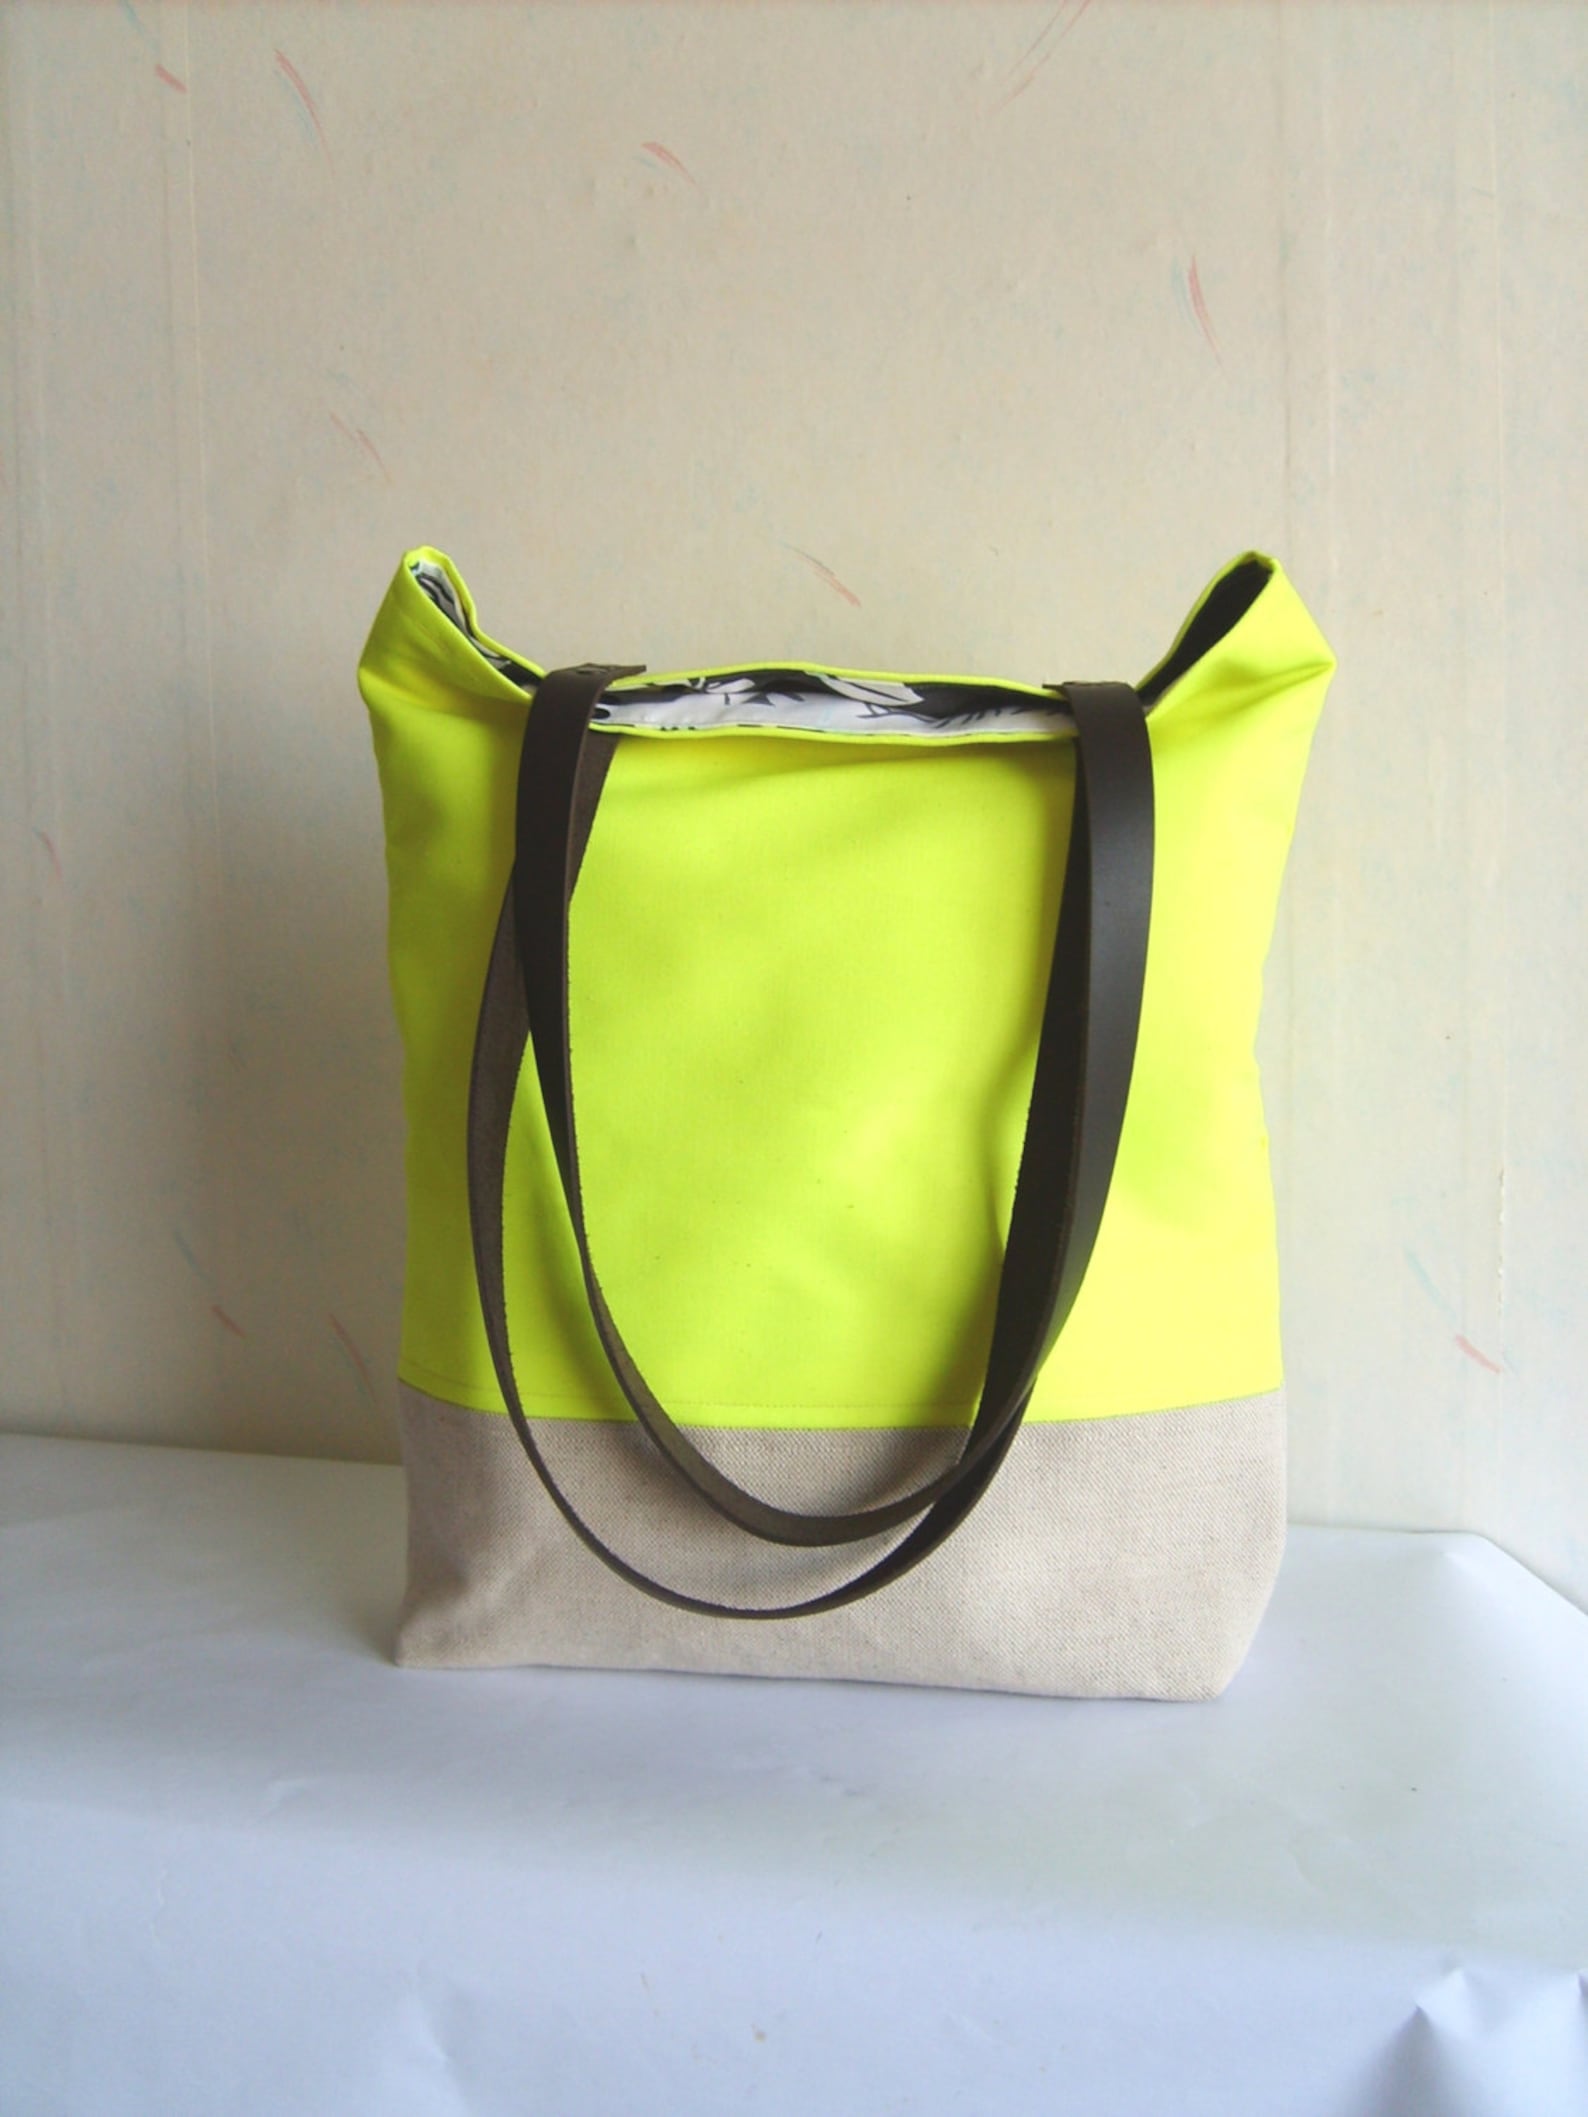 Neon Yellow Tote Bag Leather Handles Beach Bag Large Summer - Etsy